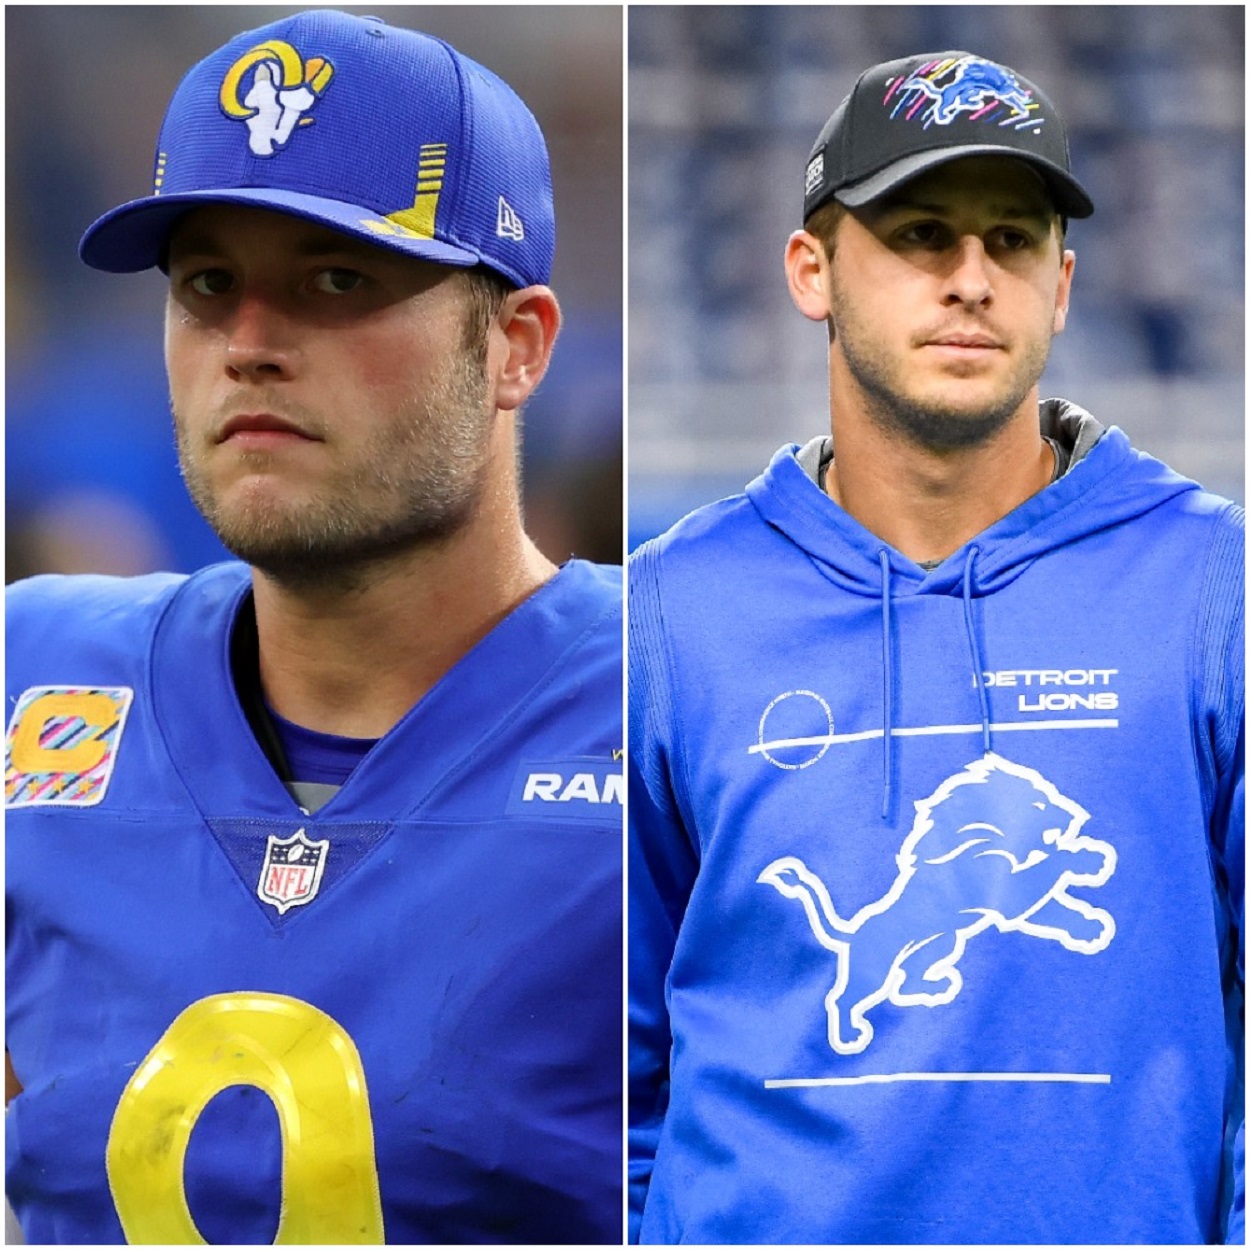 Matthew Stafford and Jared Goff side-by-side